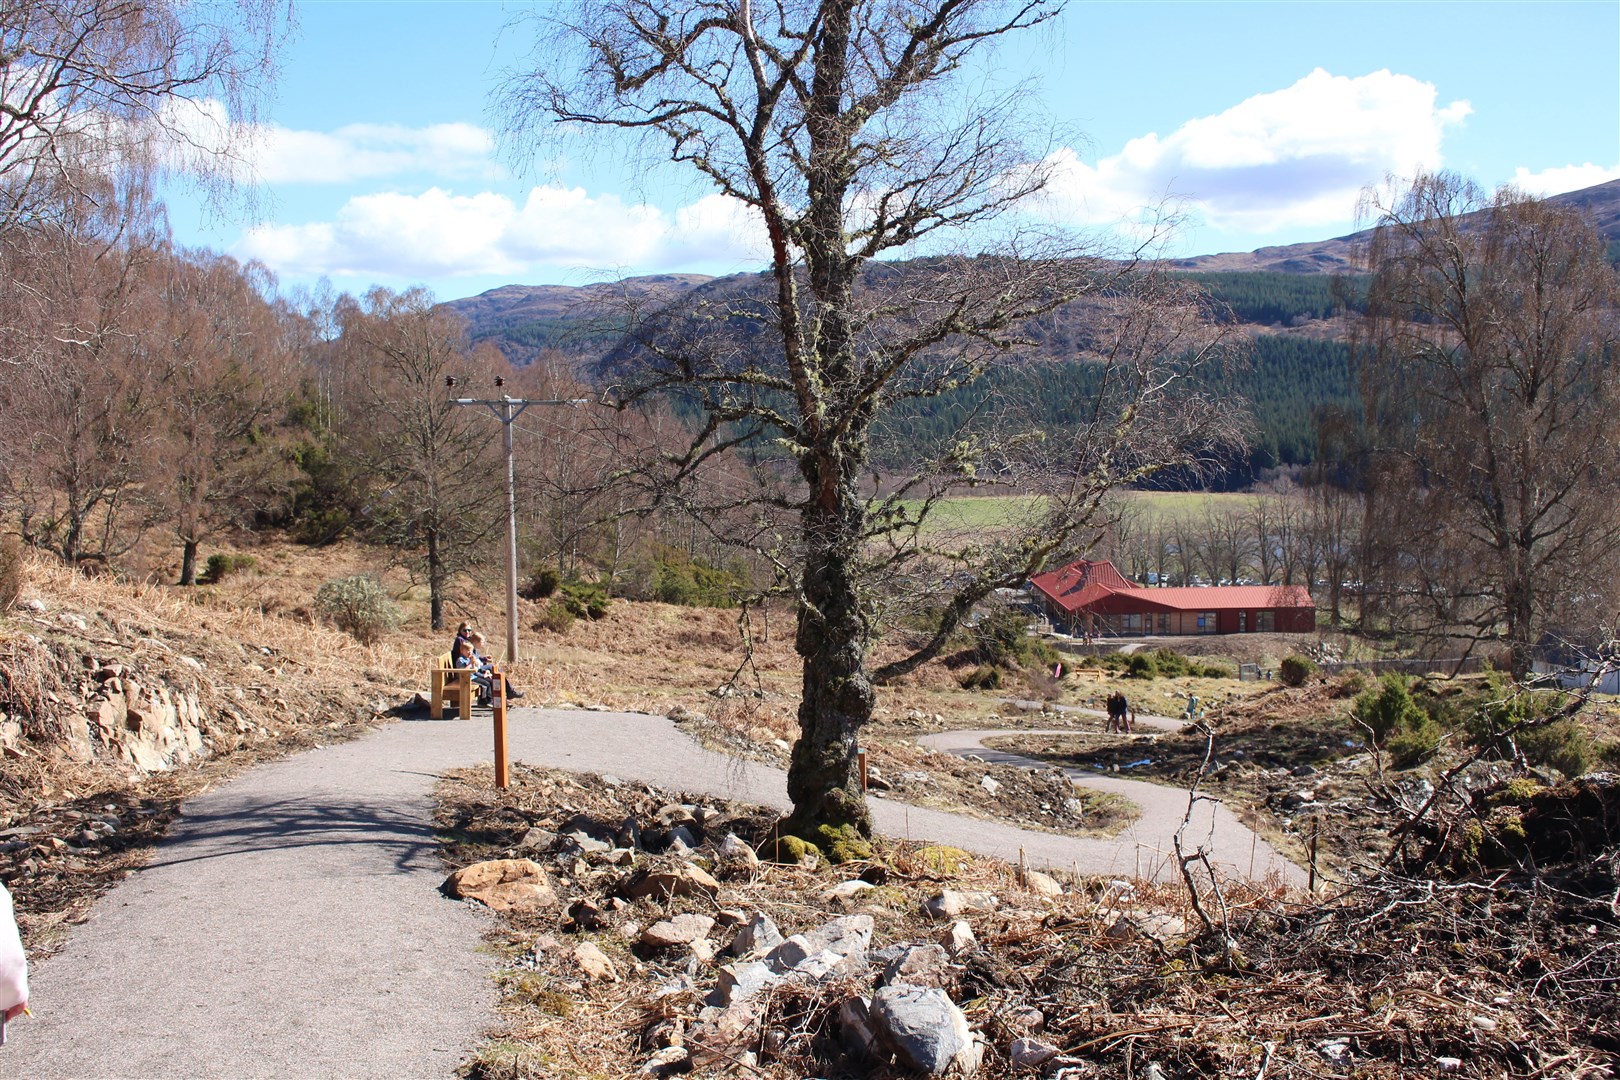 New paths have been developed as part of the Dundreggan Rewilding Centre, which opened this year.